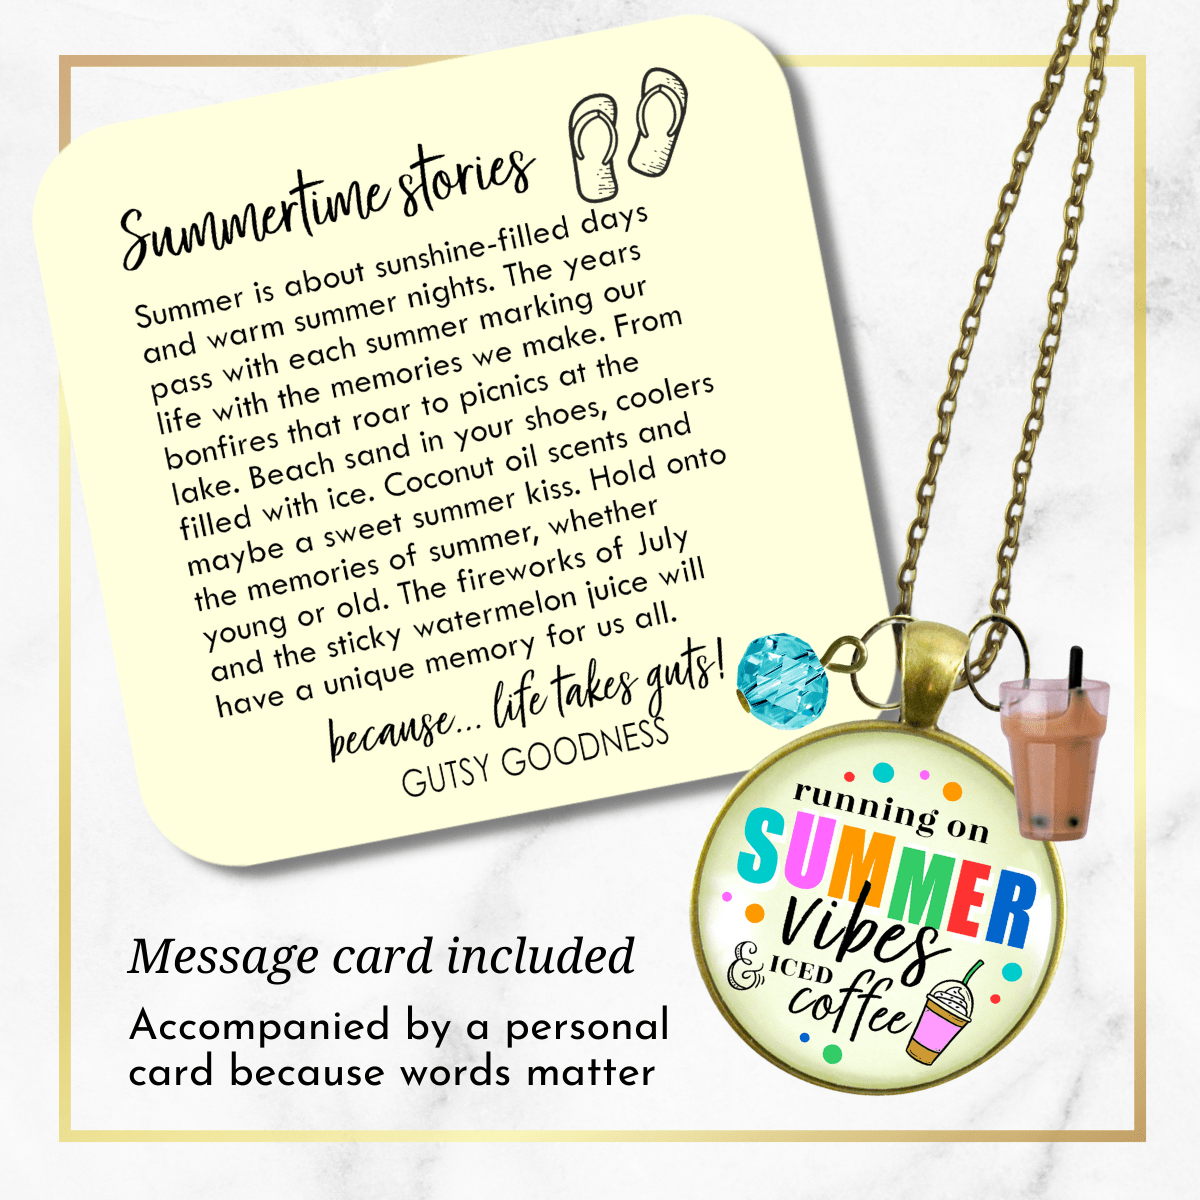 Summer Vibes Iced Coffee Necklace Colorful Beach Life Handmade Retro Chic Pendant Summertime Quote Coffee Lover BFF Gift Resin Kawaii Charm  Necklace - Gutsy Goodness Handmade Jewelry